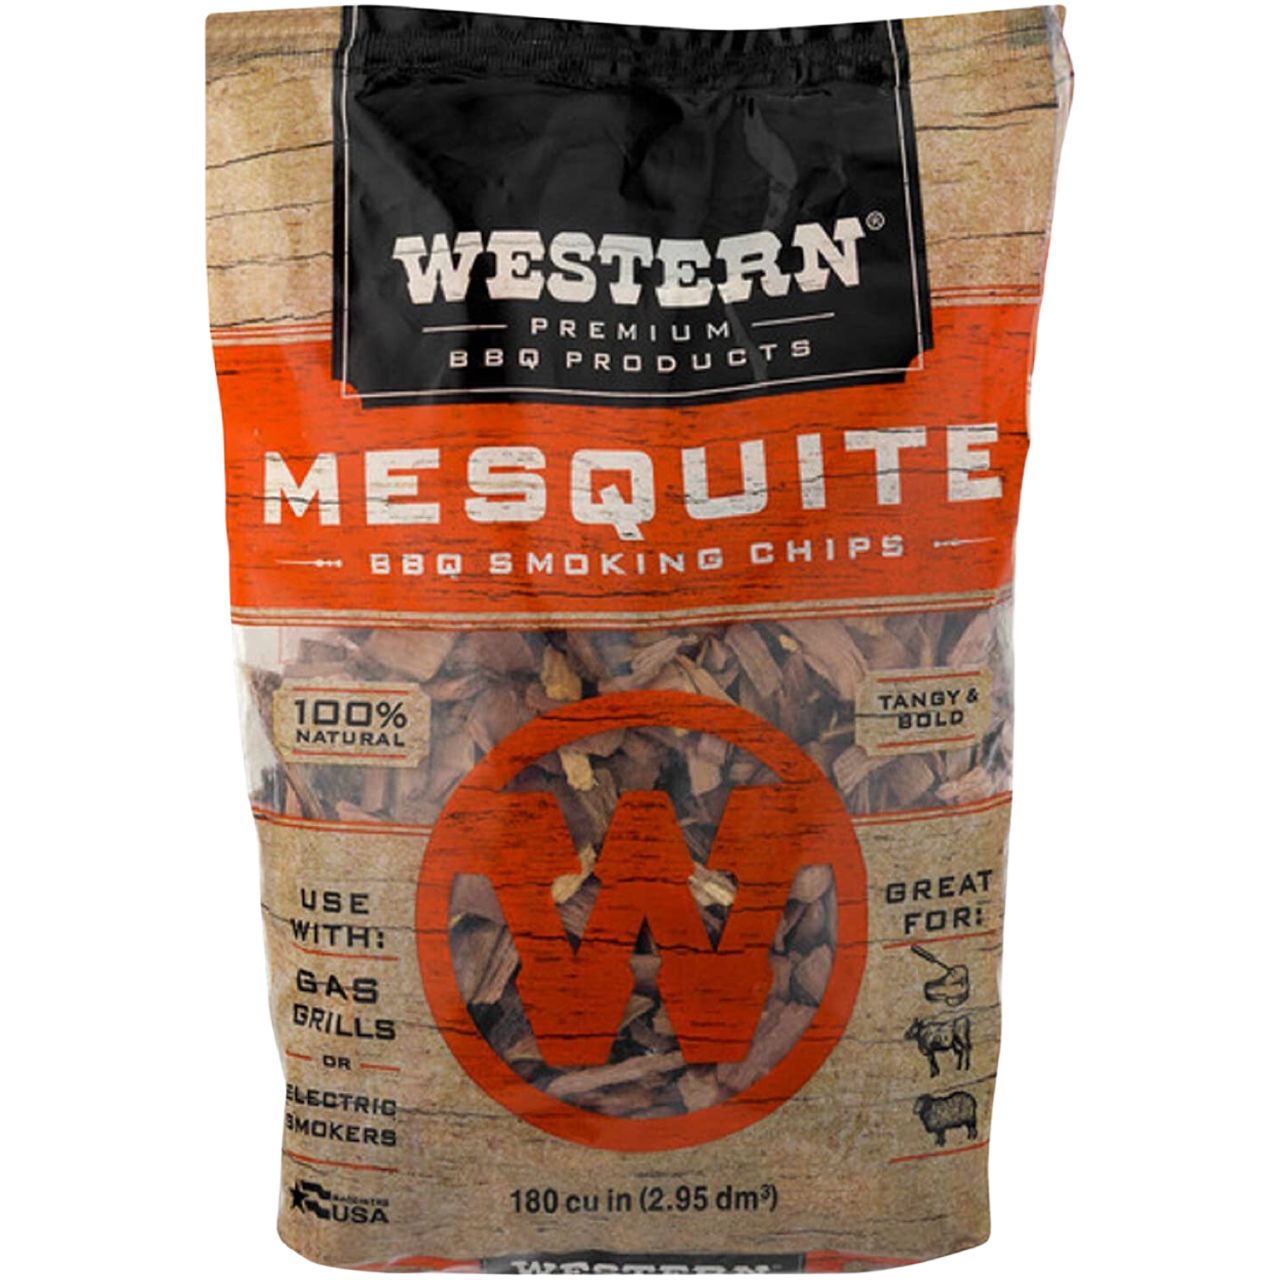 Western Mesquite Wood Smooking Chips